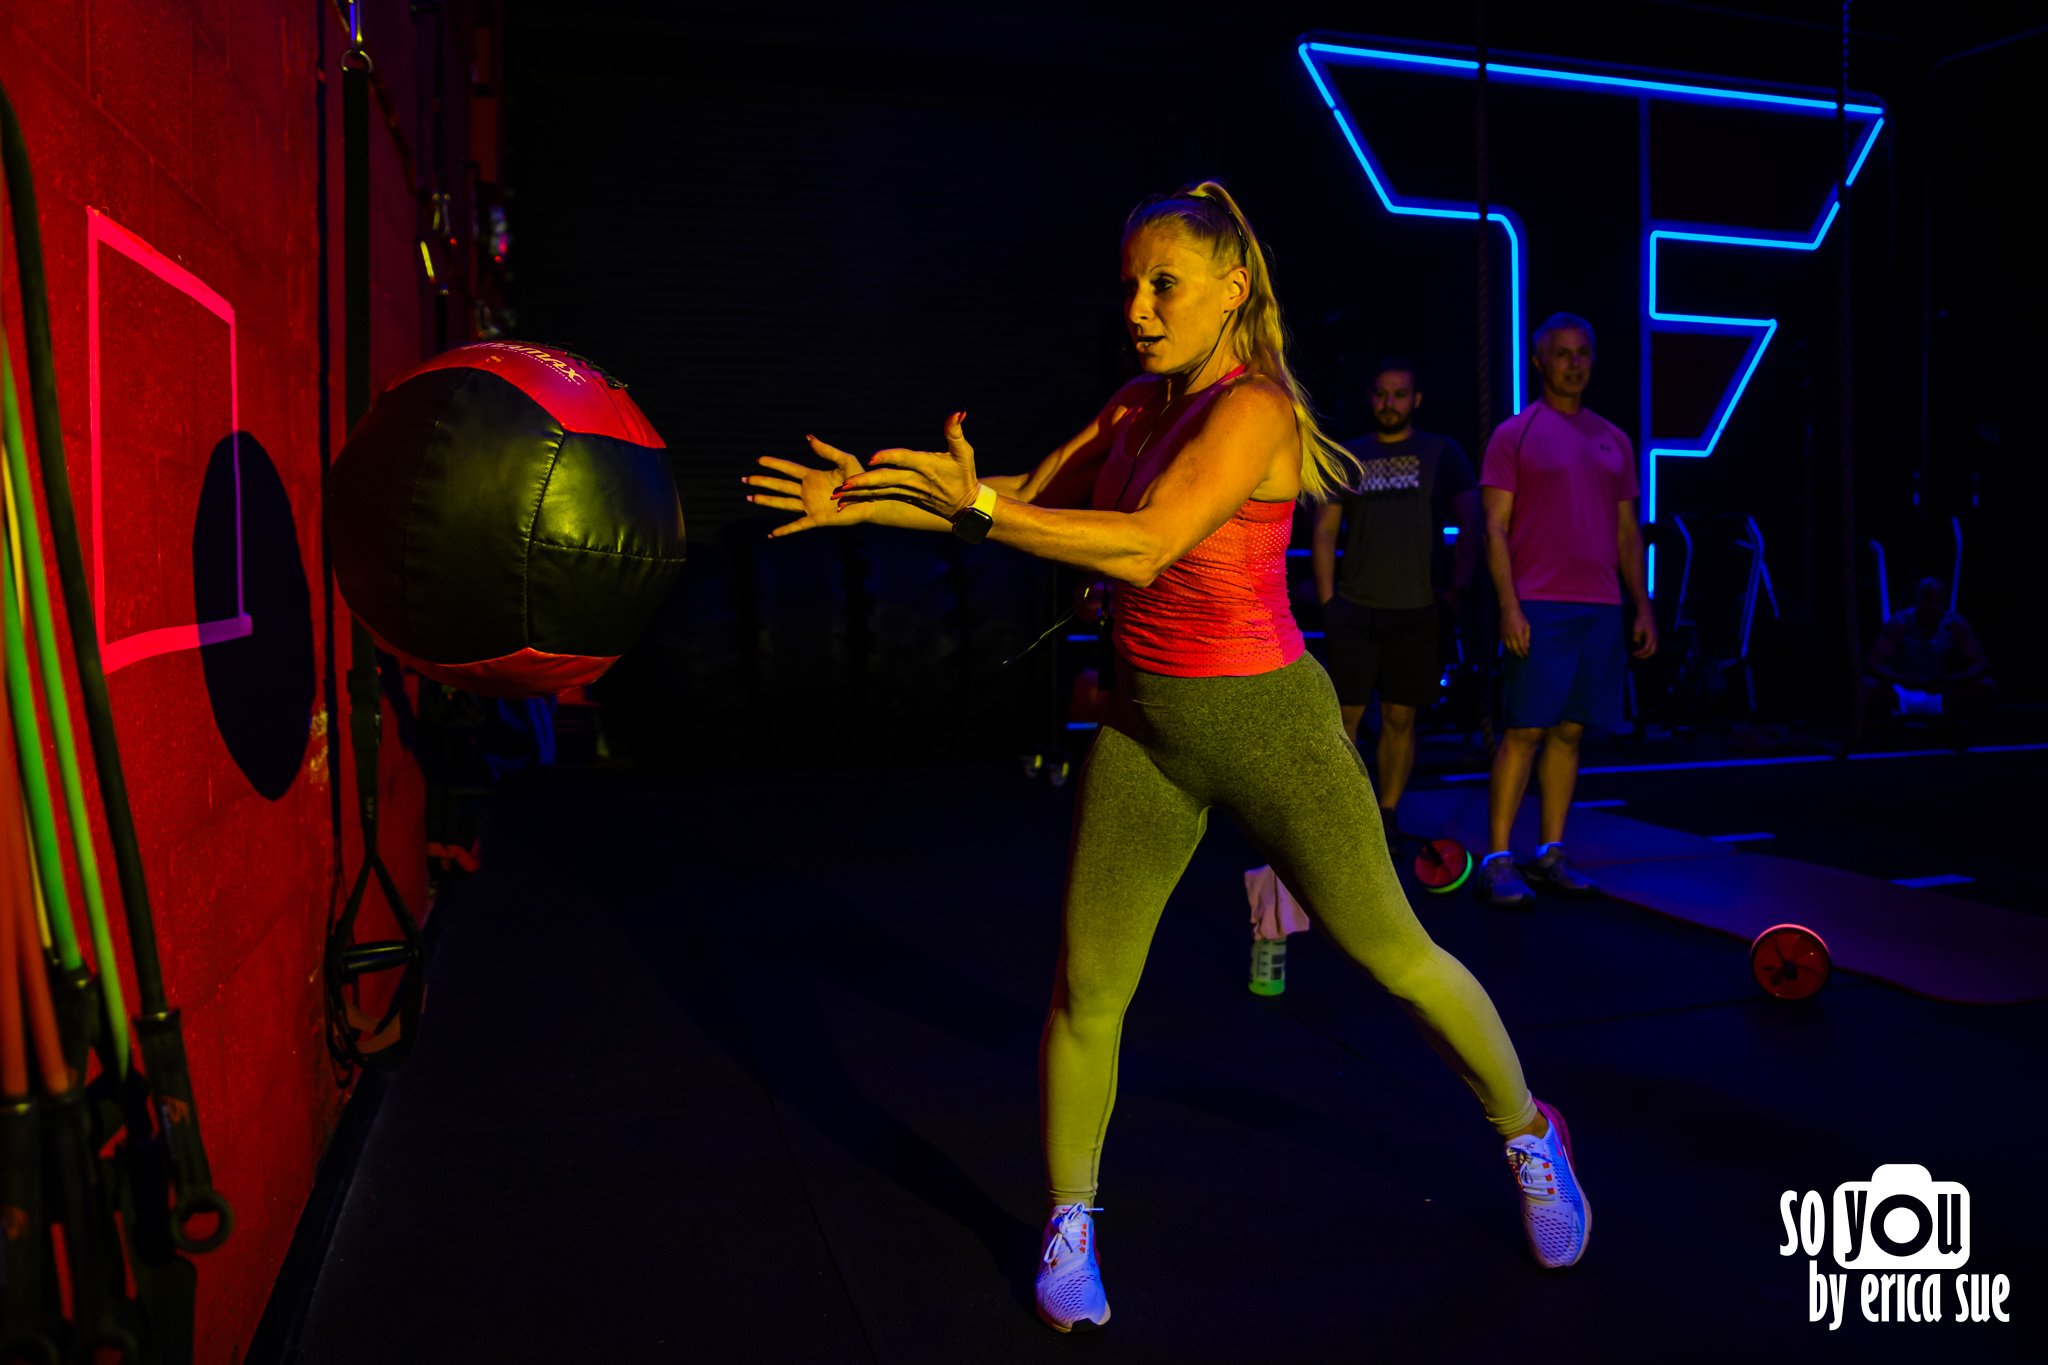 2-challenge-fitness-ft-lauderdale-glow-workout-fri-night-lights-so-you-by-erica-sue-davie-photographer-ES3_6088.jpg